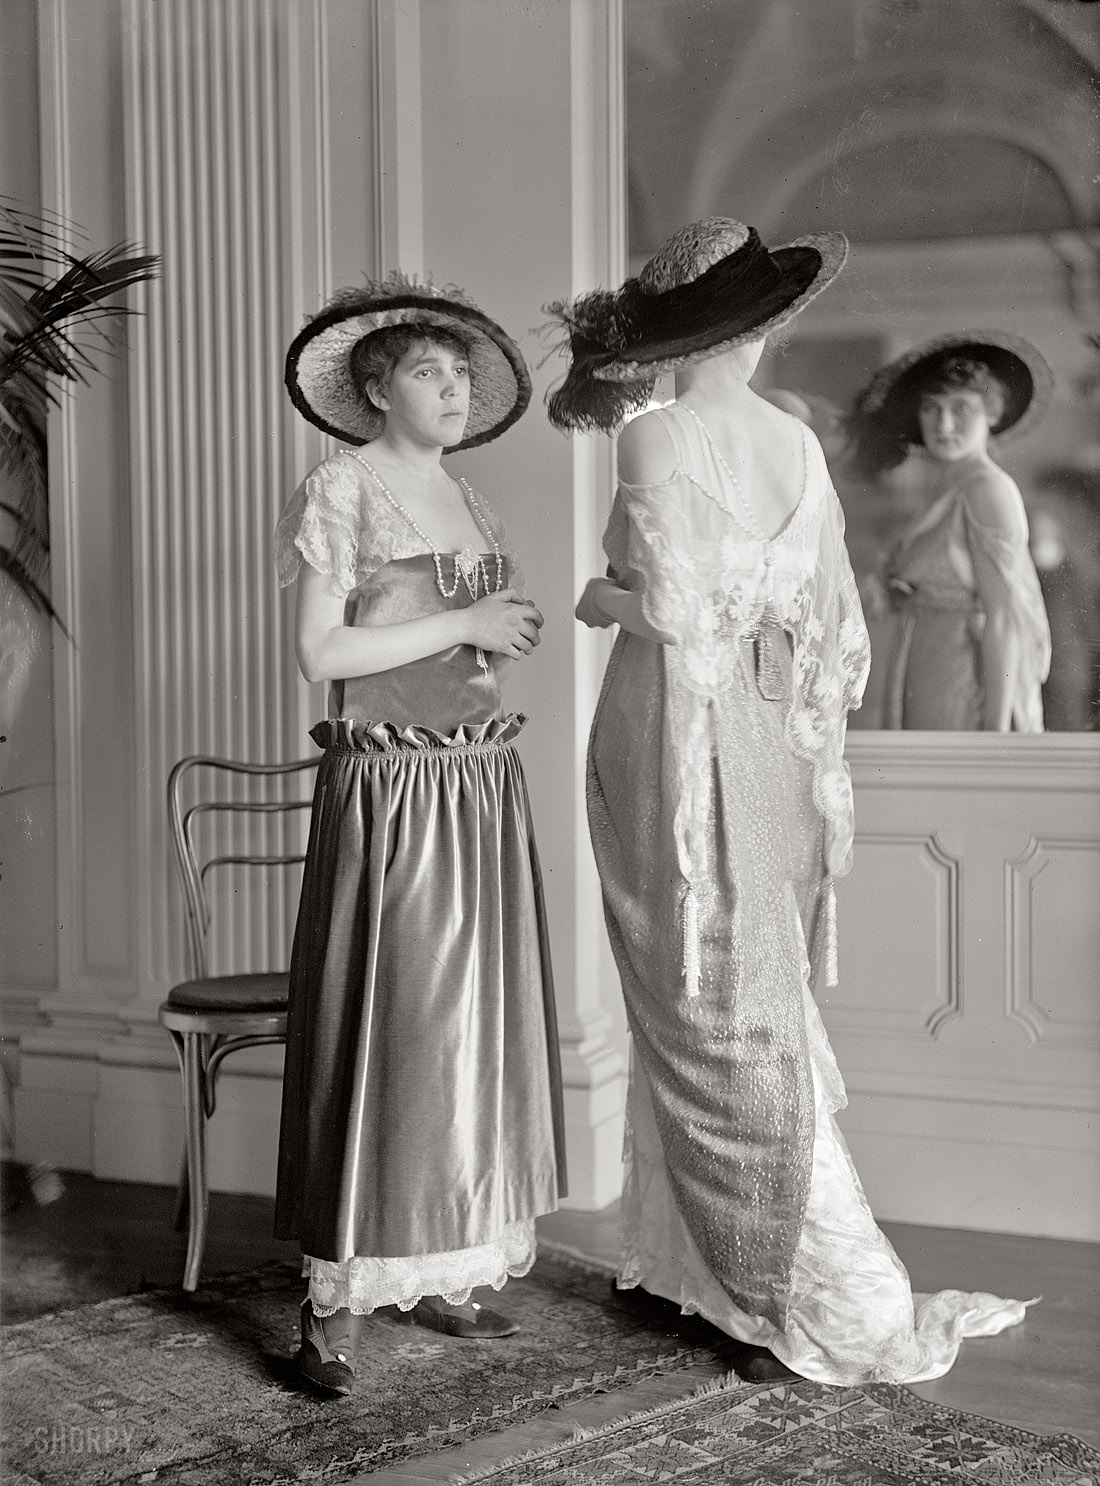 "National Style Show models, Washington, 1914." These girls were born 80 years too early if you ask me. Harris & Ewing Collection glass negative. View full size.